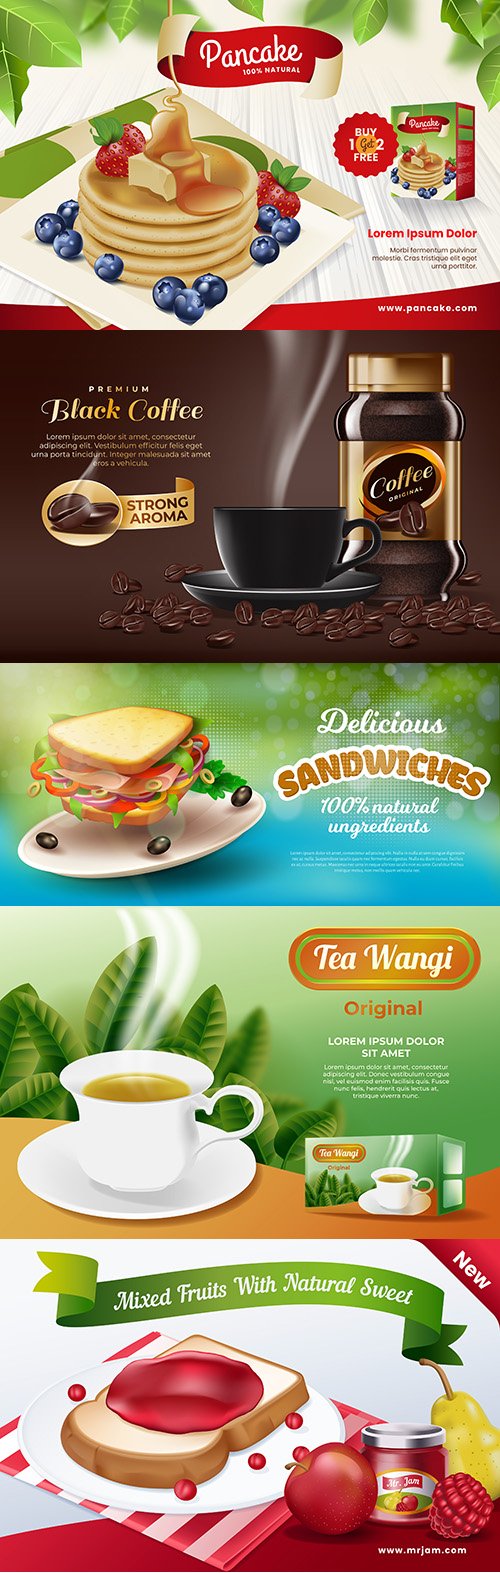 Food advertising drinks and food design